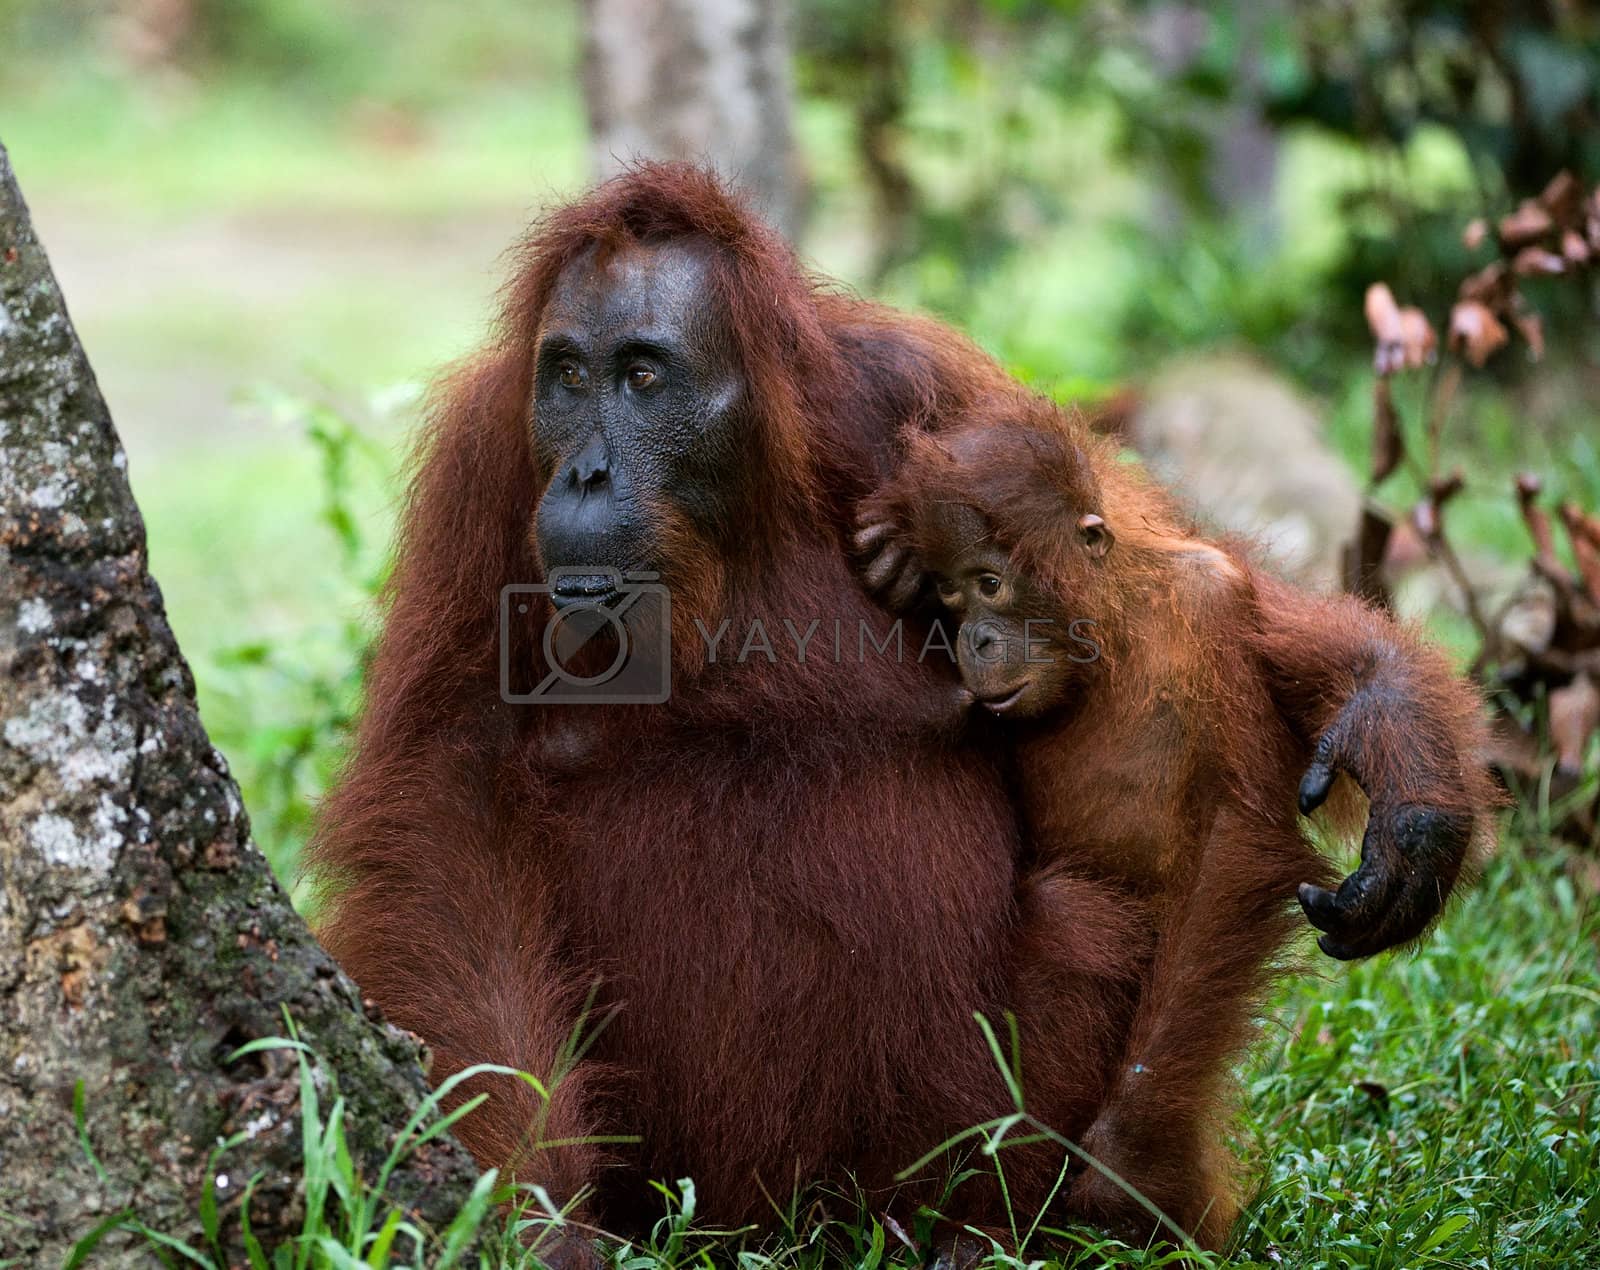 Royalty free image of The orangutan Mum with a cub by SURZ